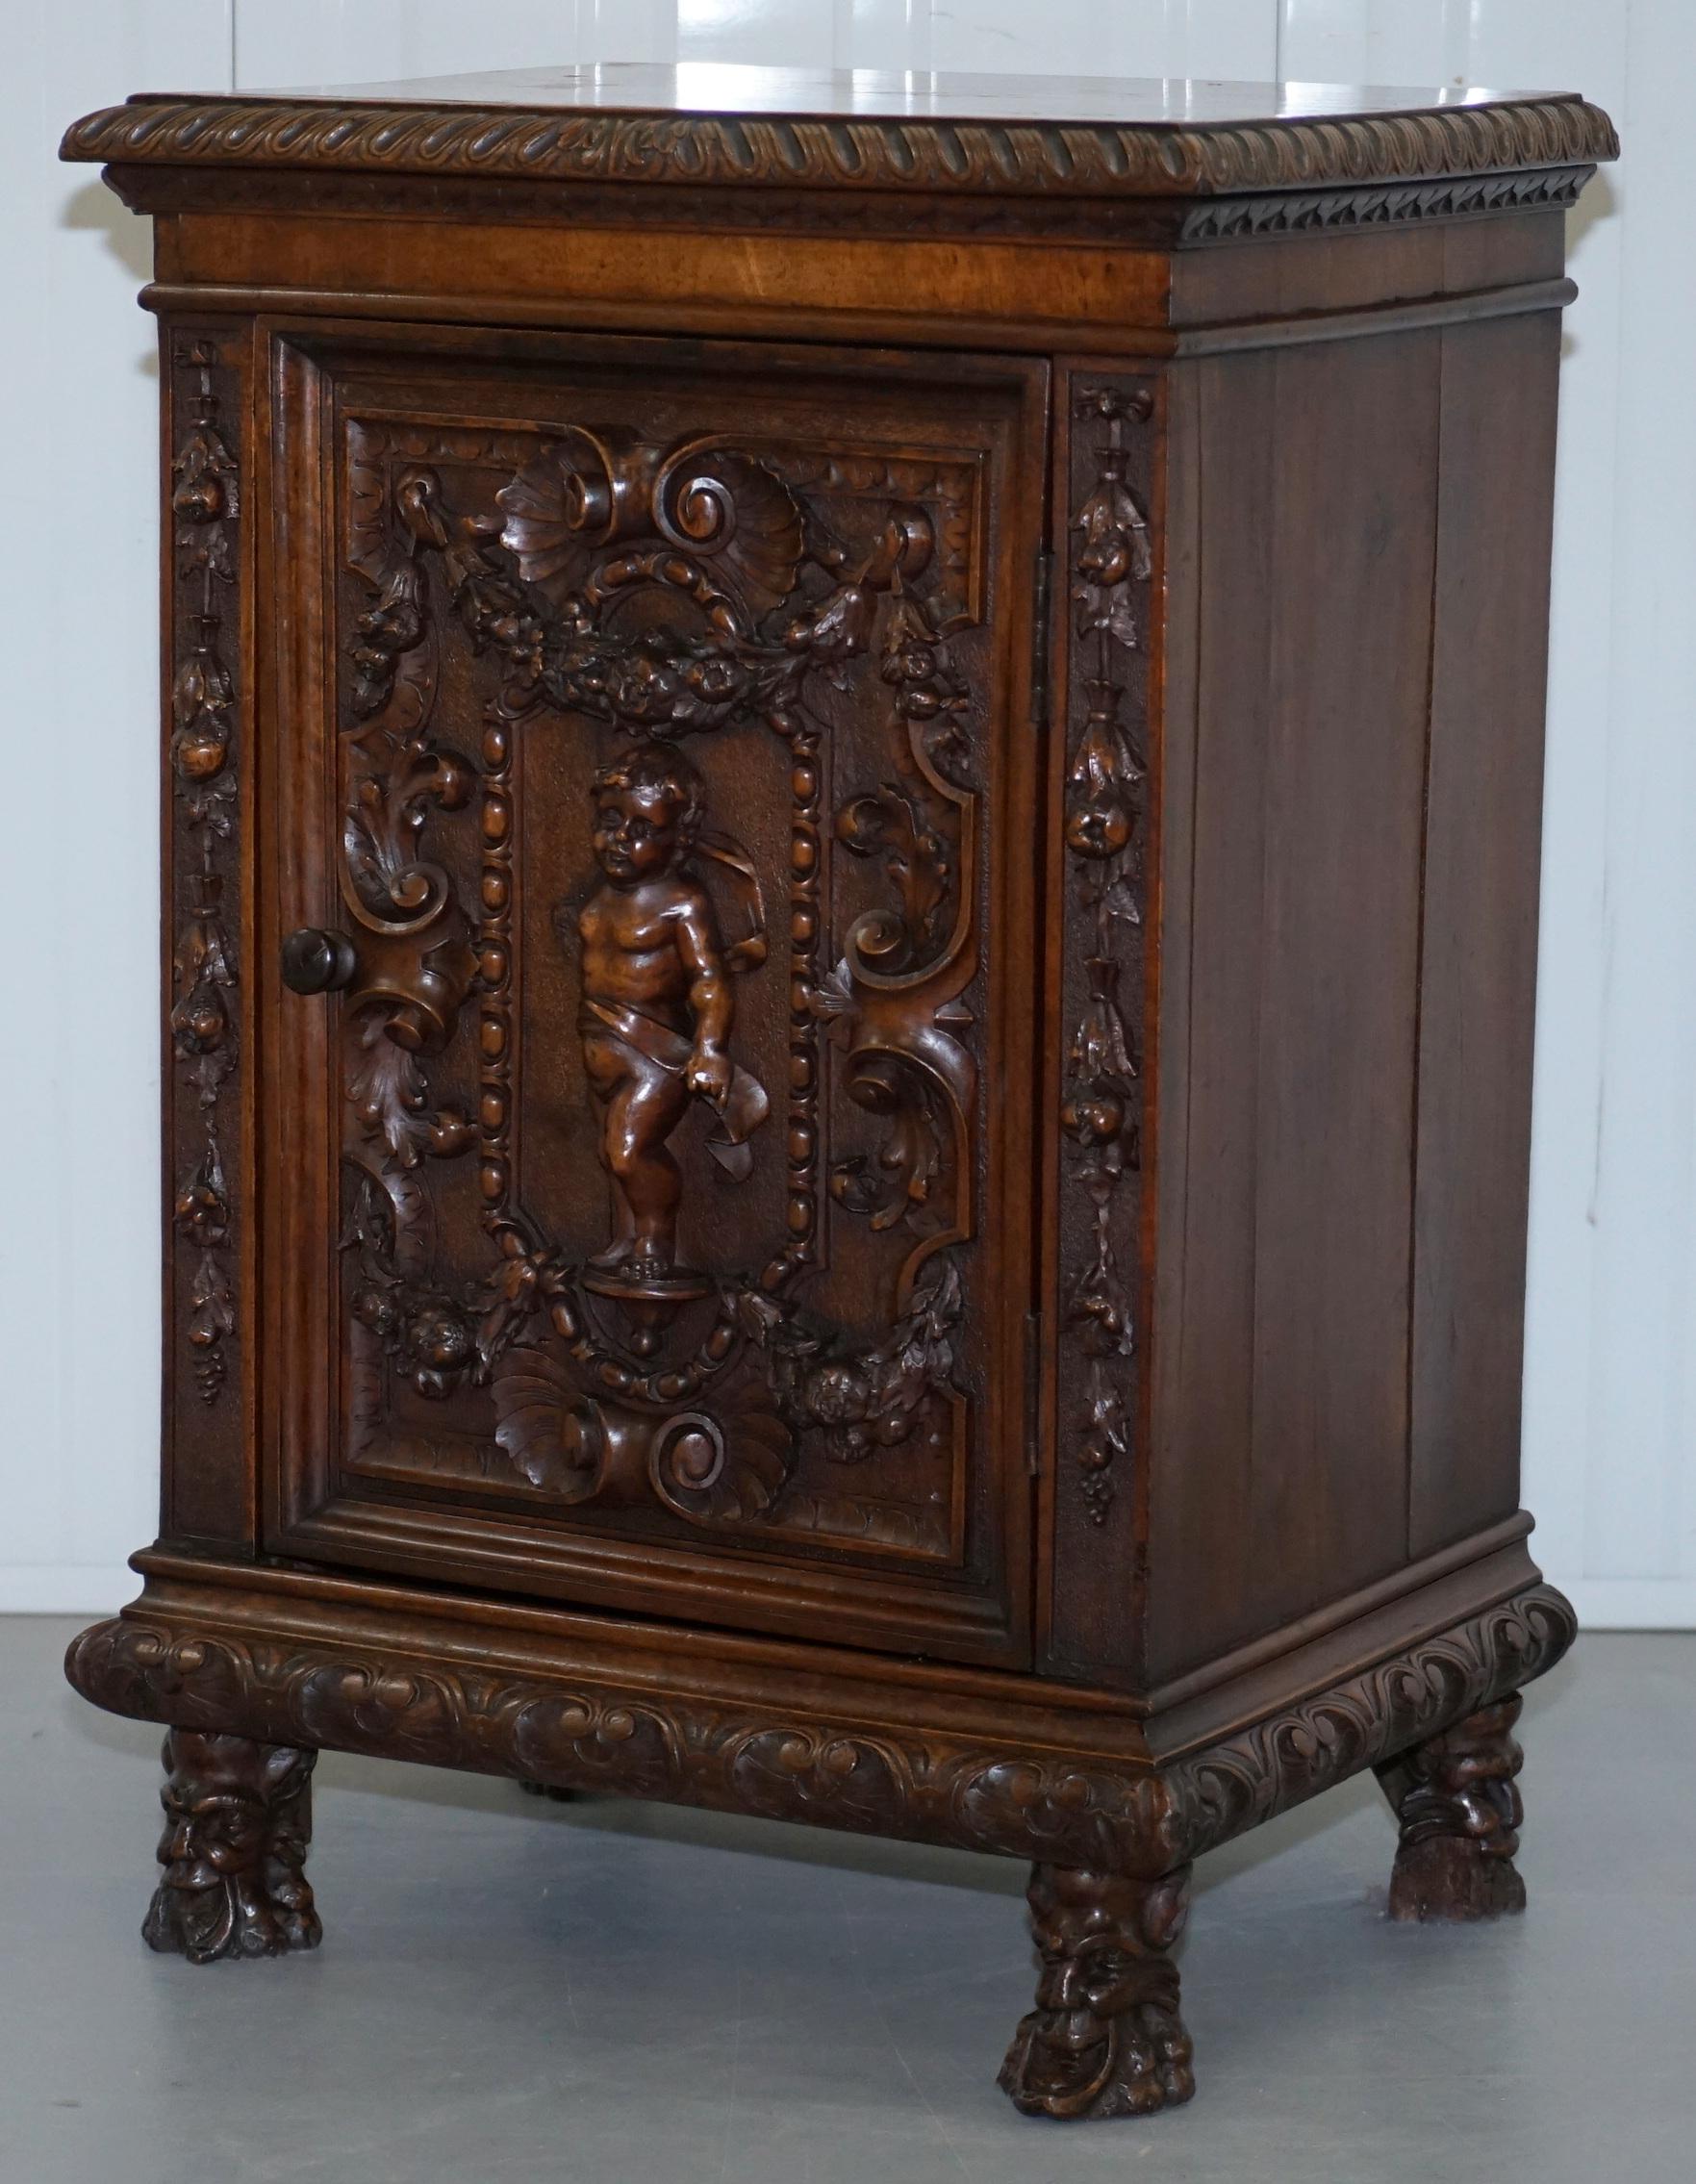 Jacobean Stunning circa 1780 Carved Walnut Side Cabinet with Cherub & Floral Detailing